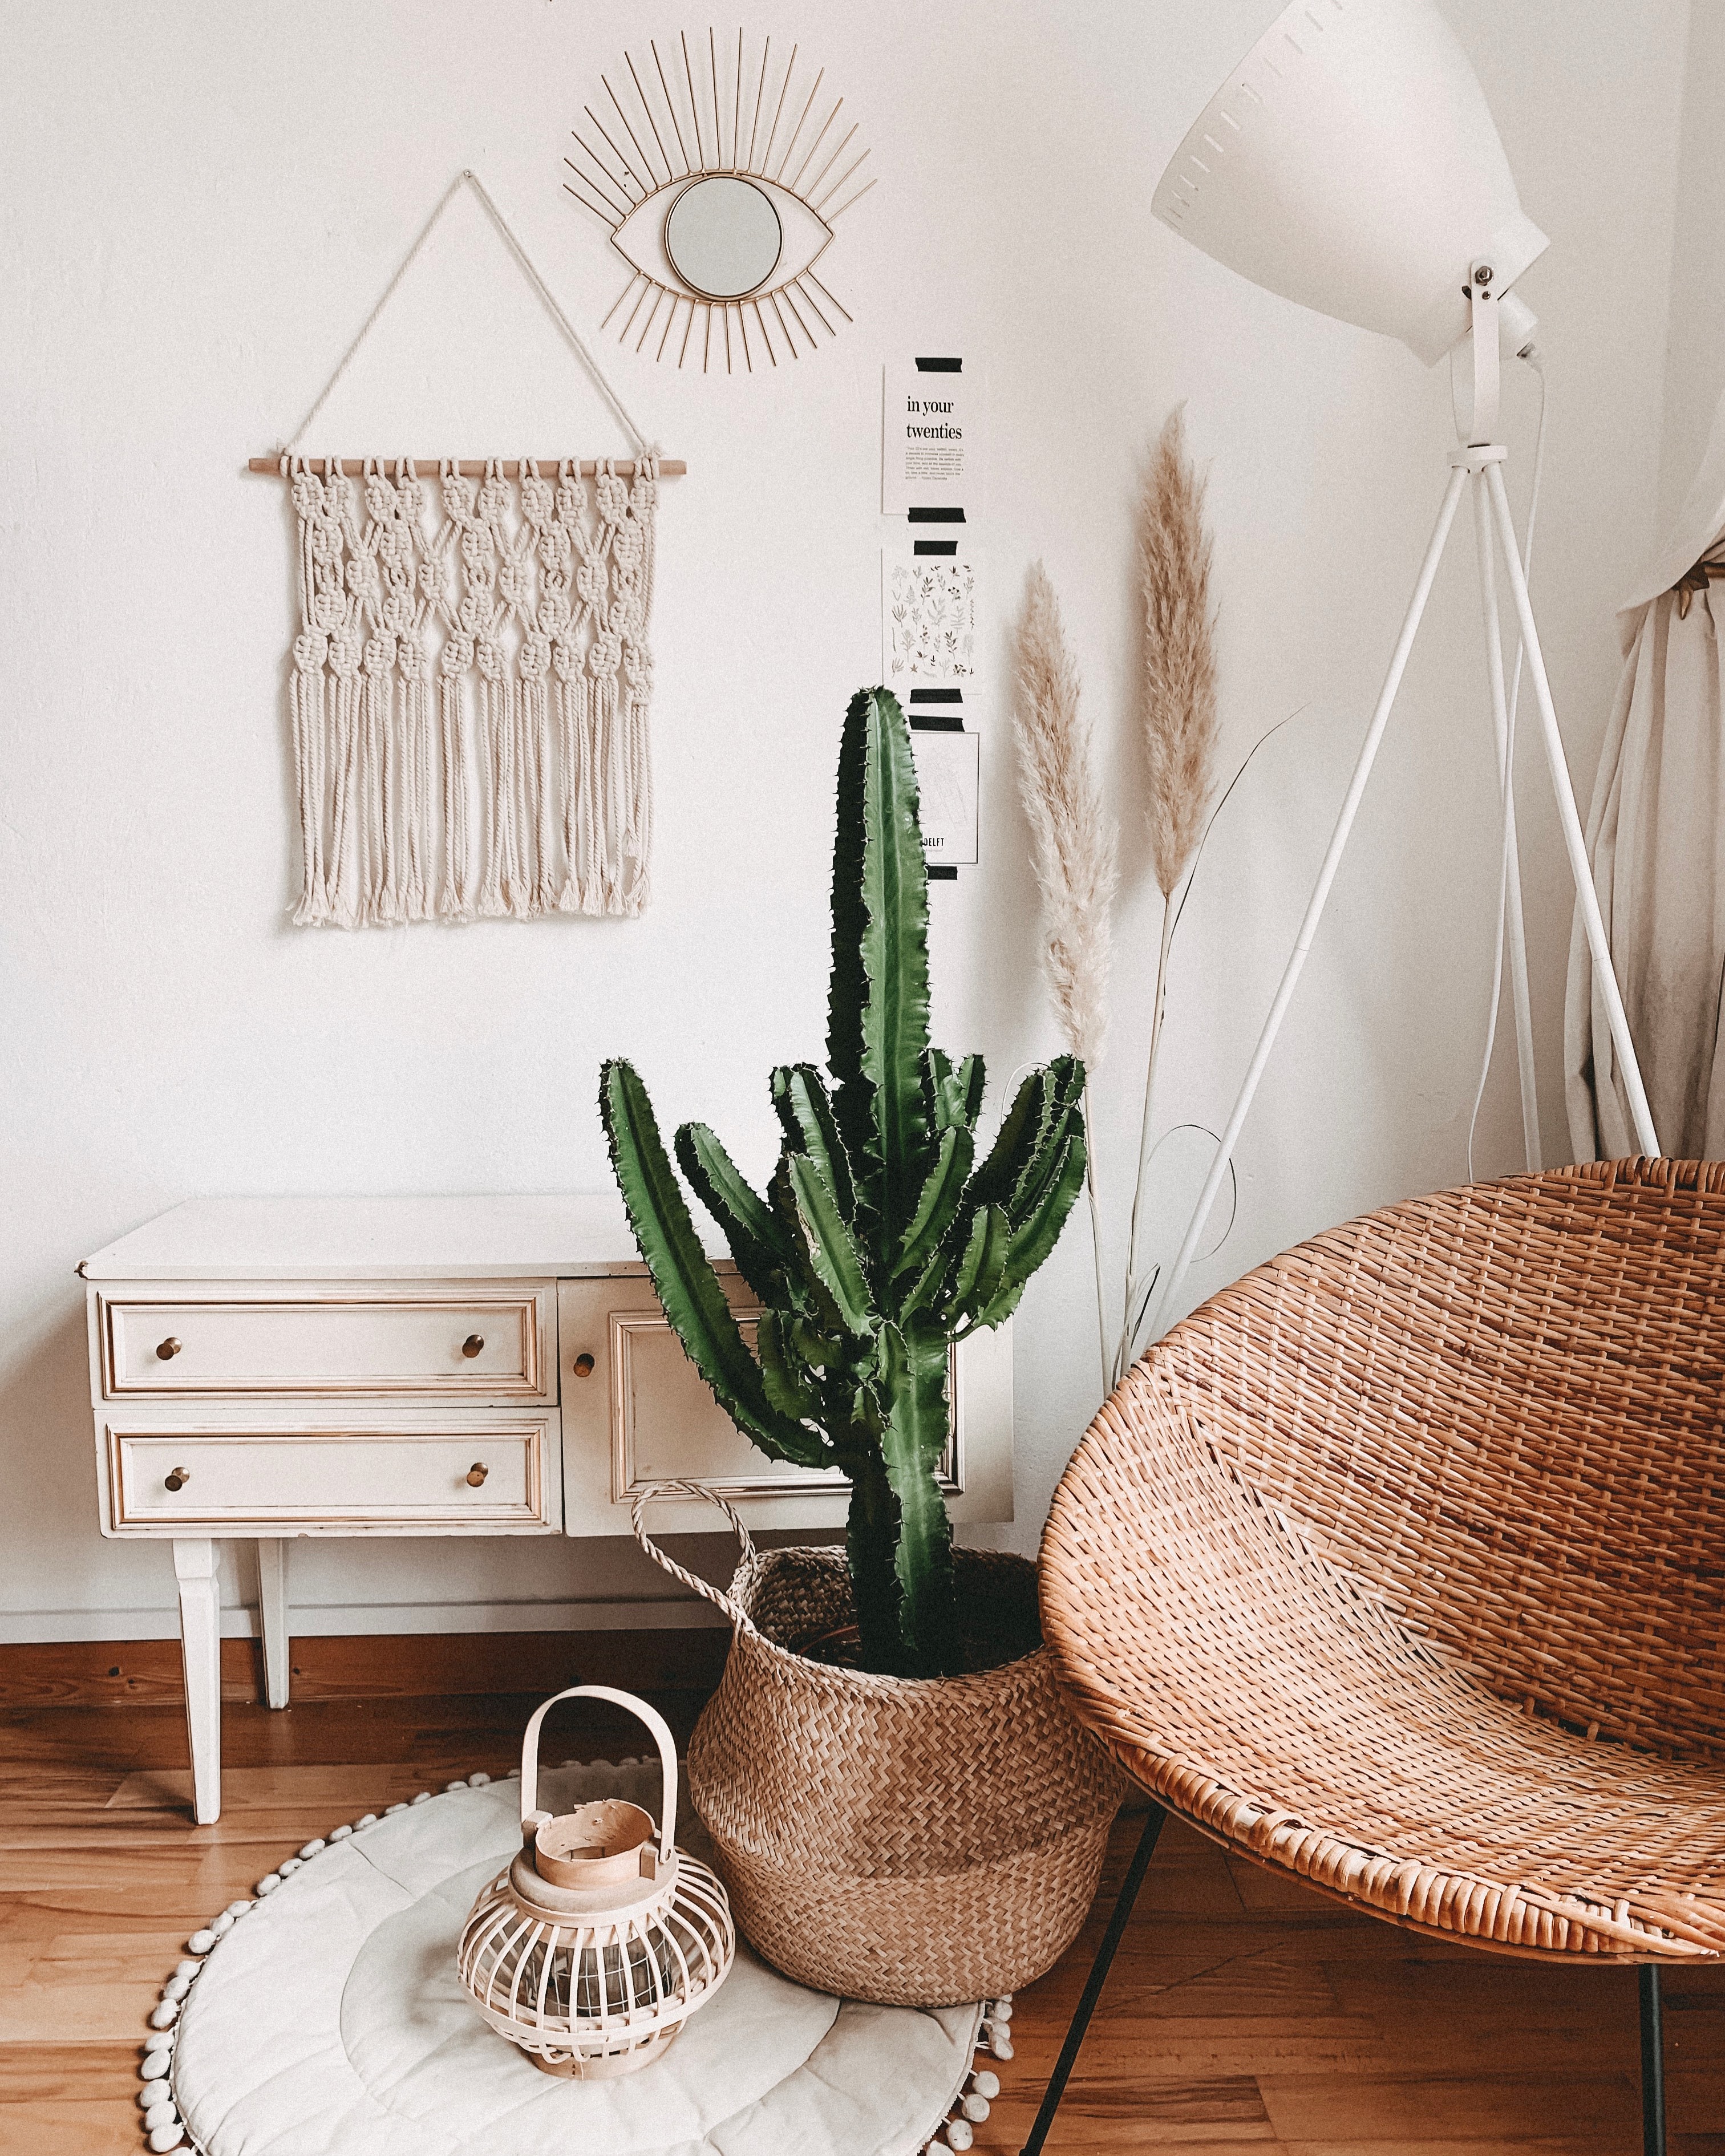 alyssa strohmann 2r2RUsEU1Aw unsplash - What Is Your Dream Style For Your New Home?